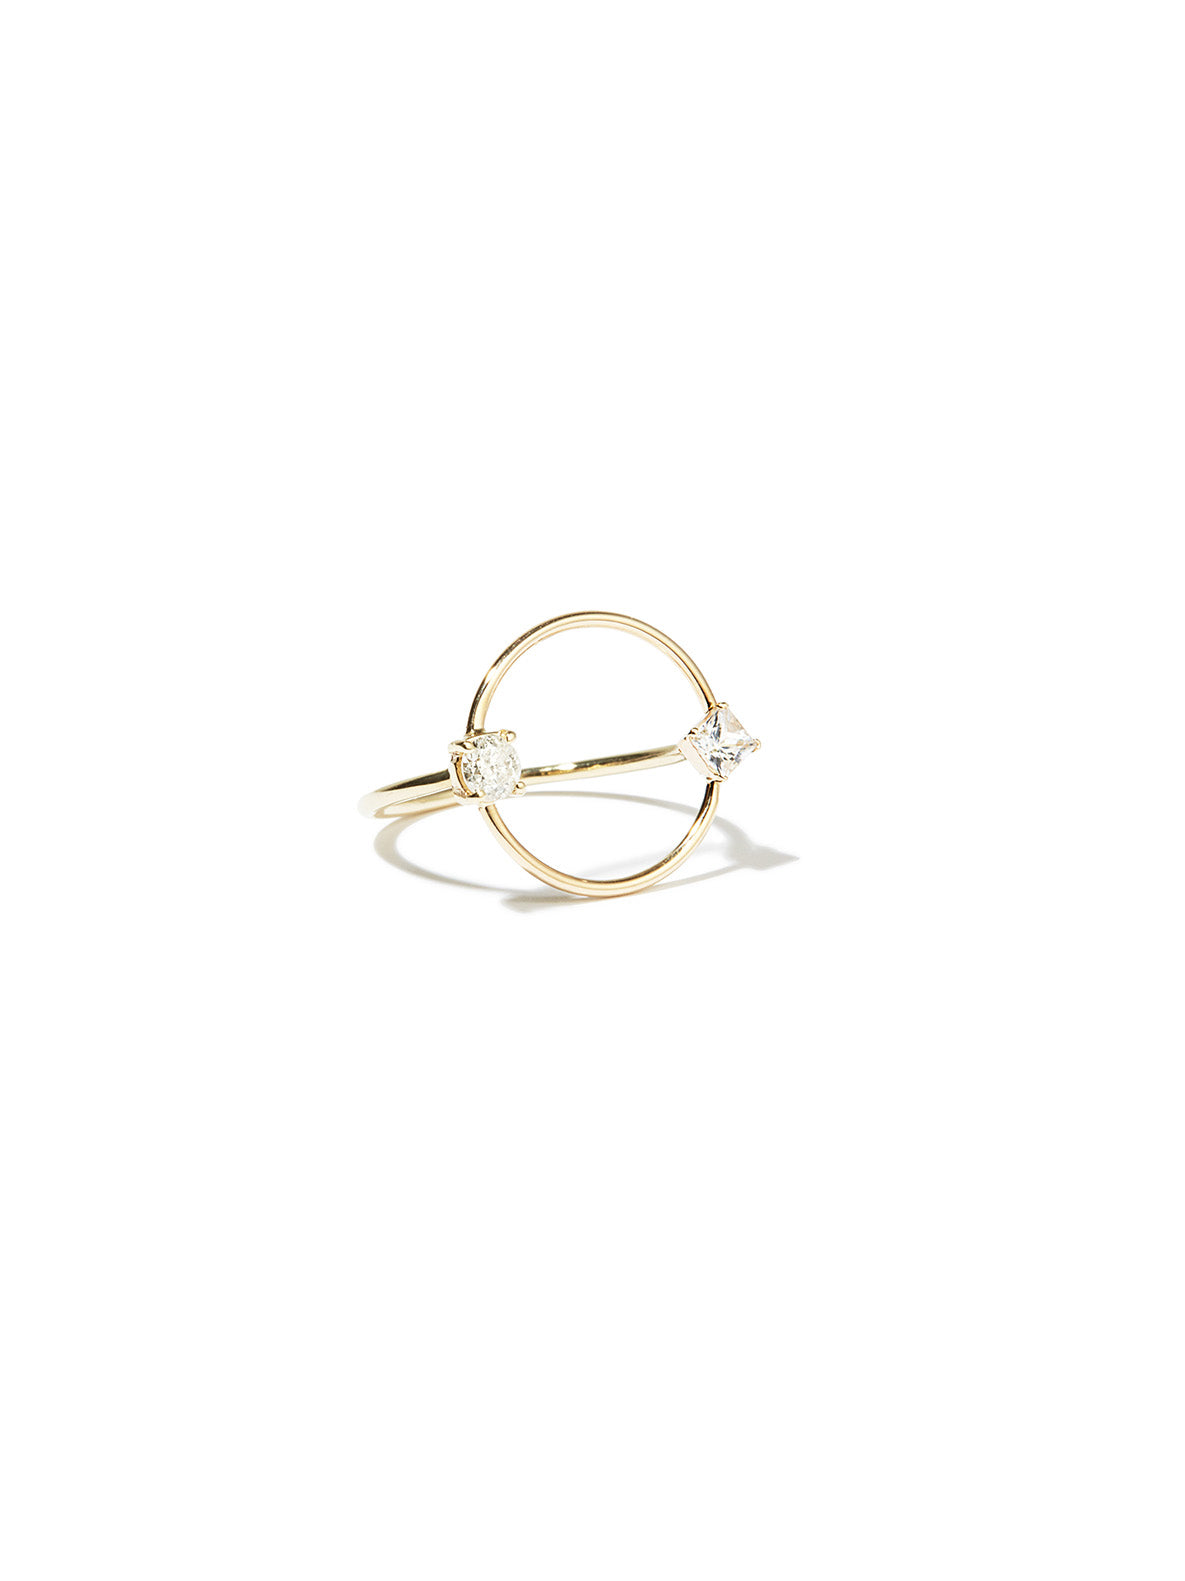 Off-Axis Circle Gemstone Ring - Archival Collection